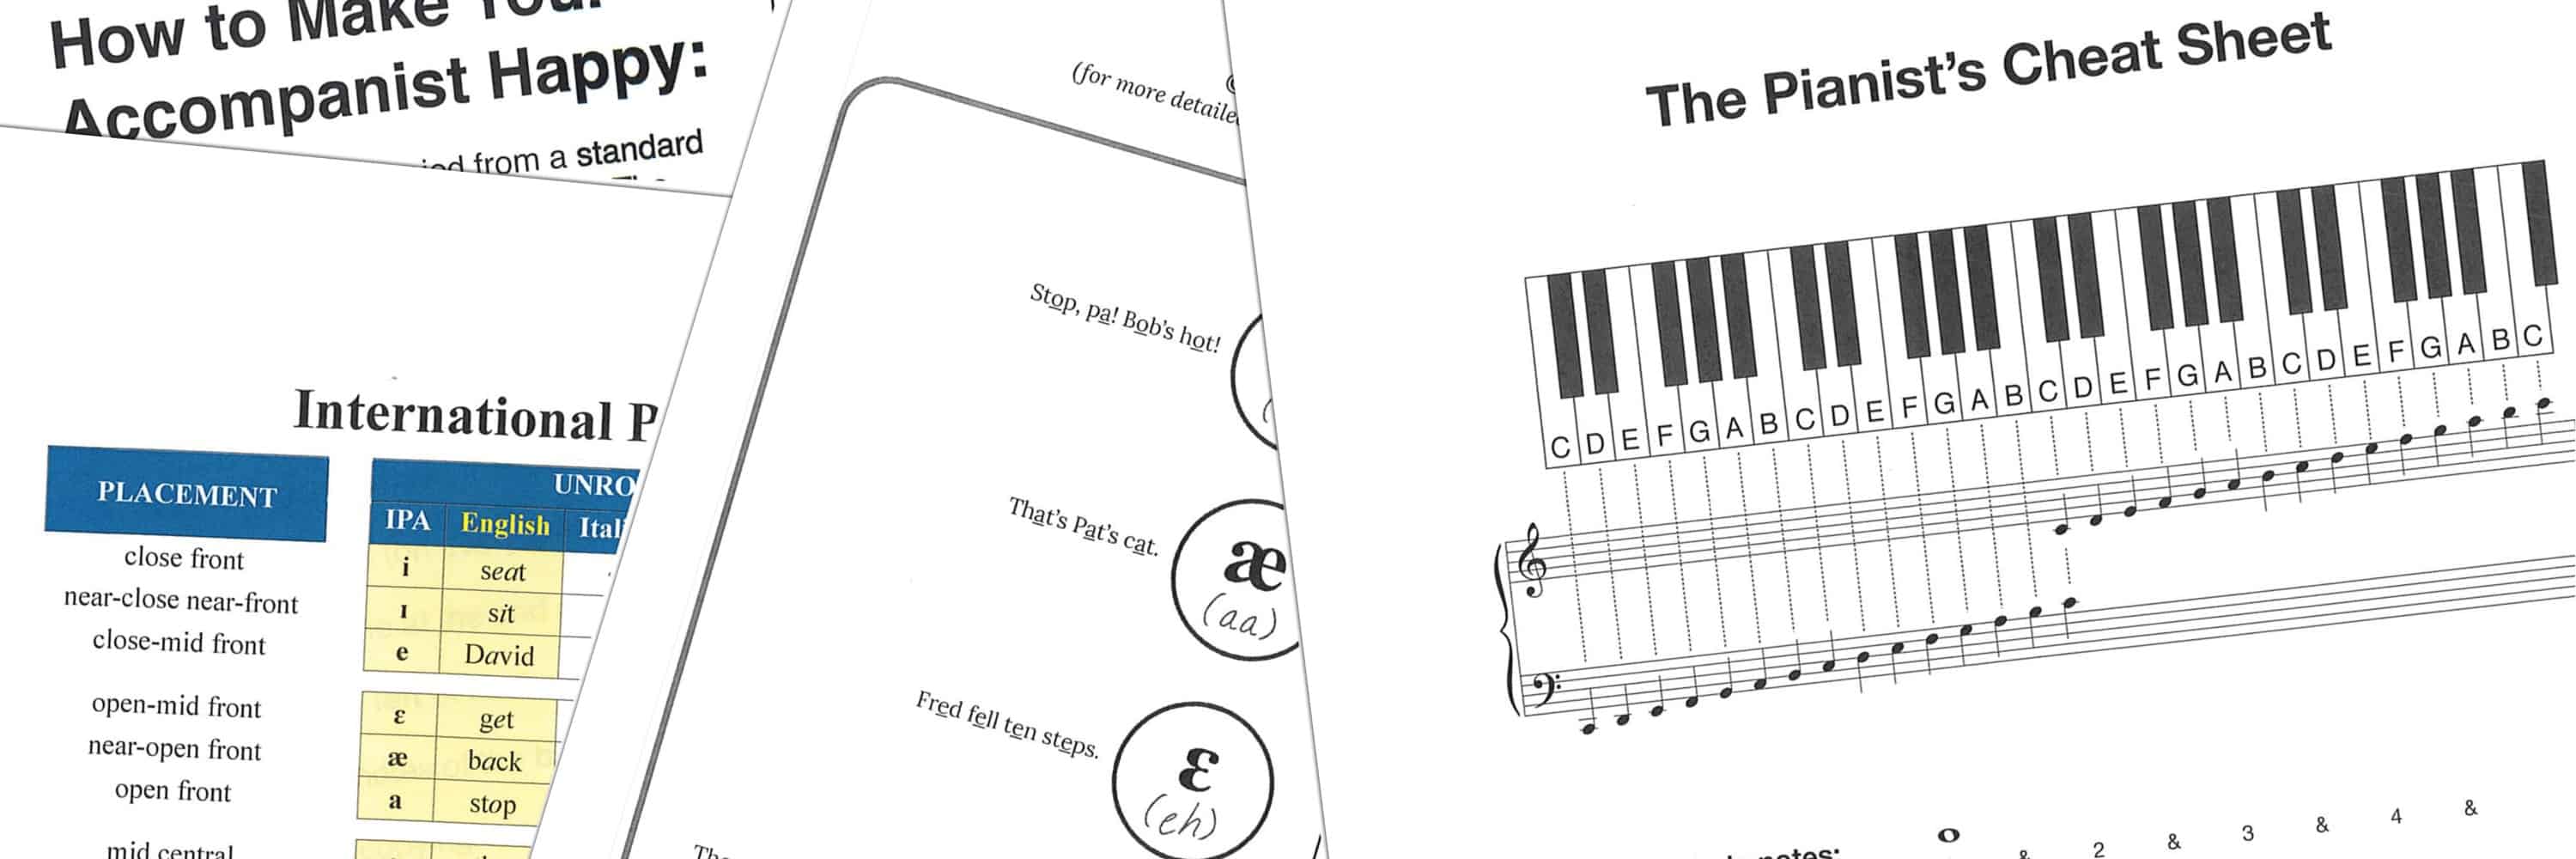 Photo of various music theory handouts overlapping one another at various angles